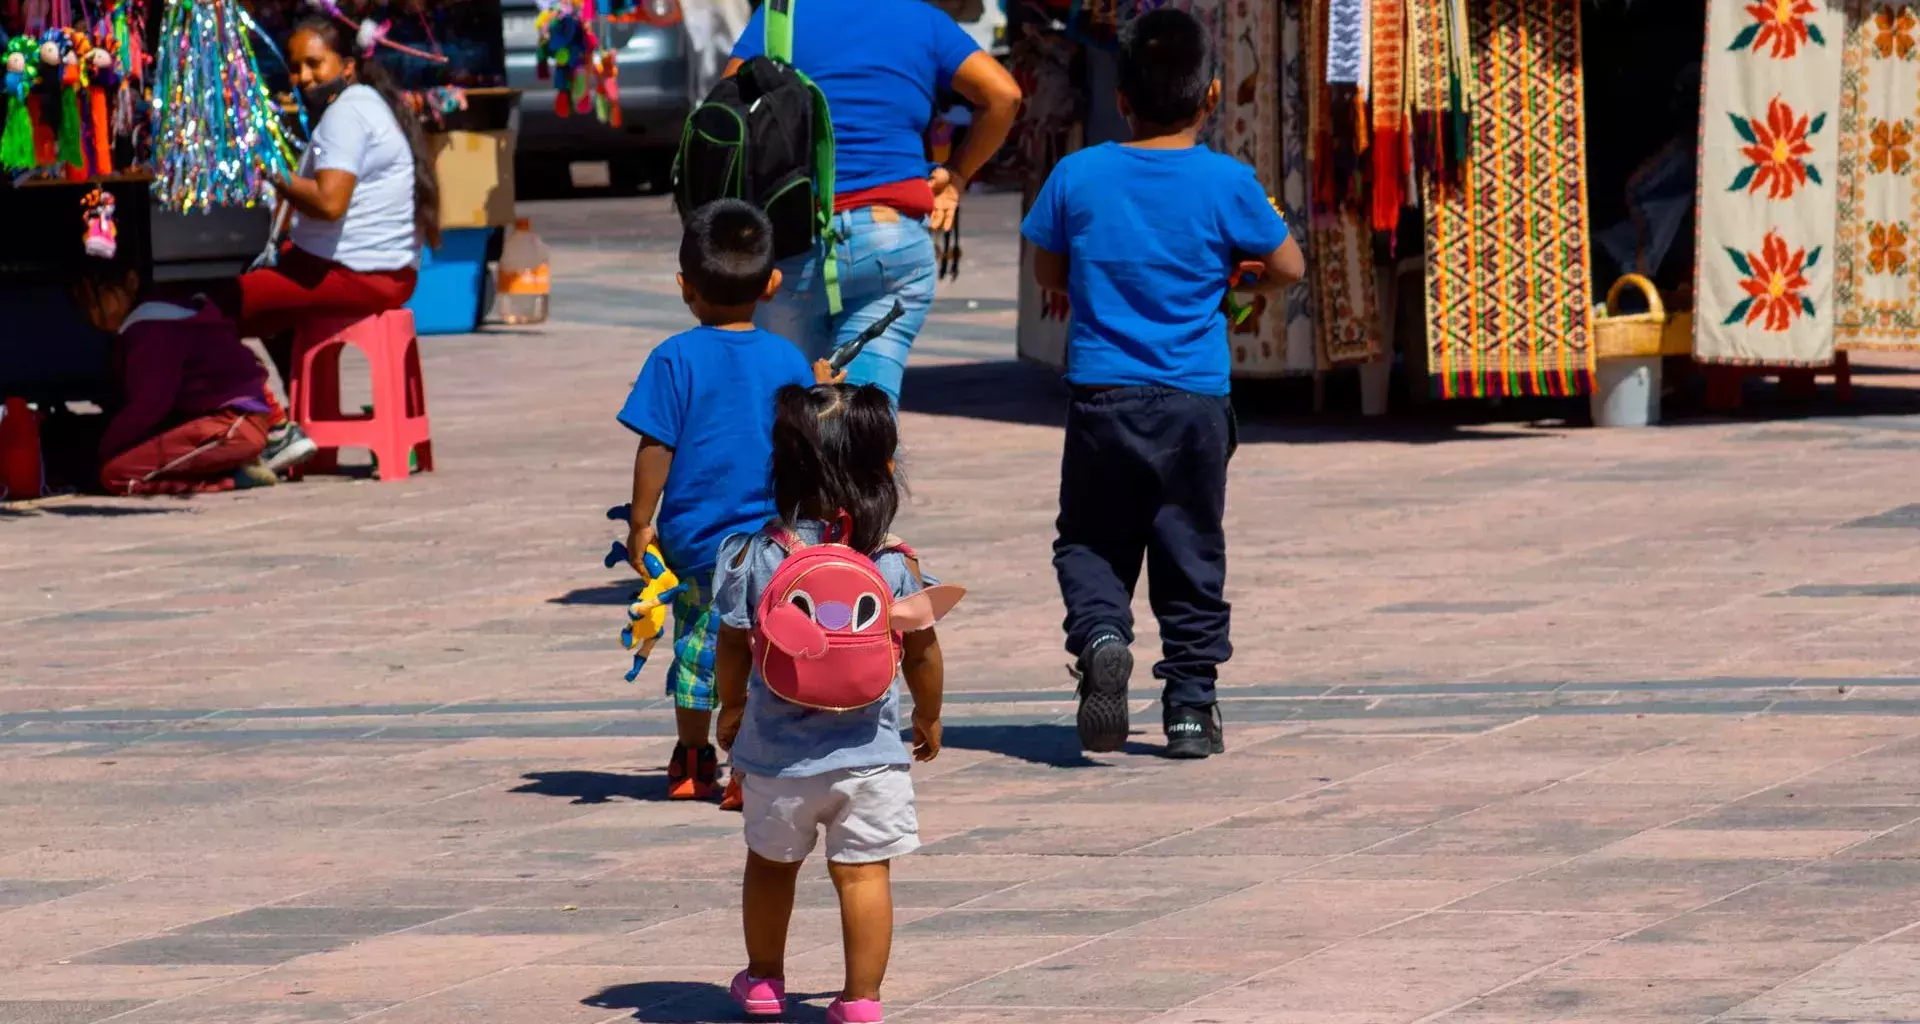 Early childhood development in cities faces challenges related to the climate